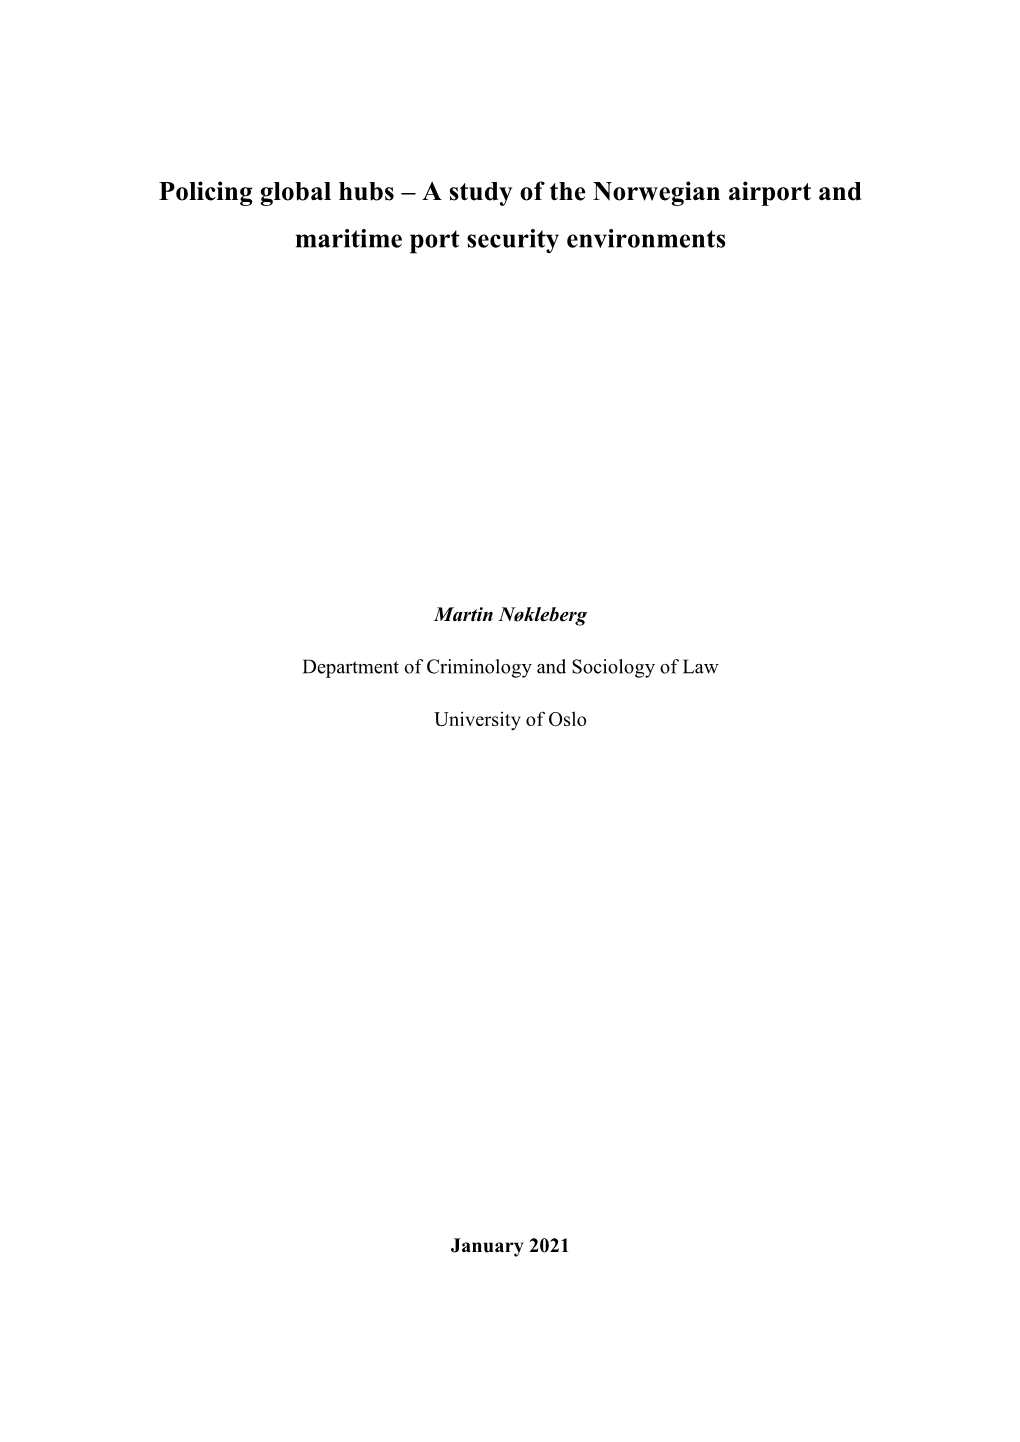 Policing Global Hubs – a Study of the Norwegian Airport and Maritime Port Security Environments